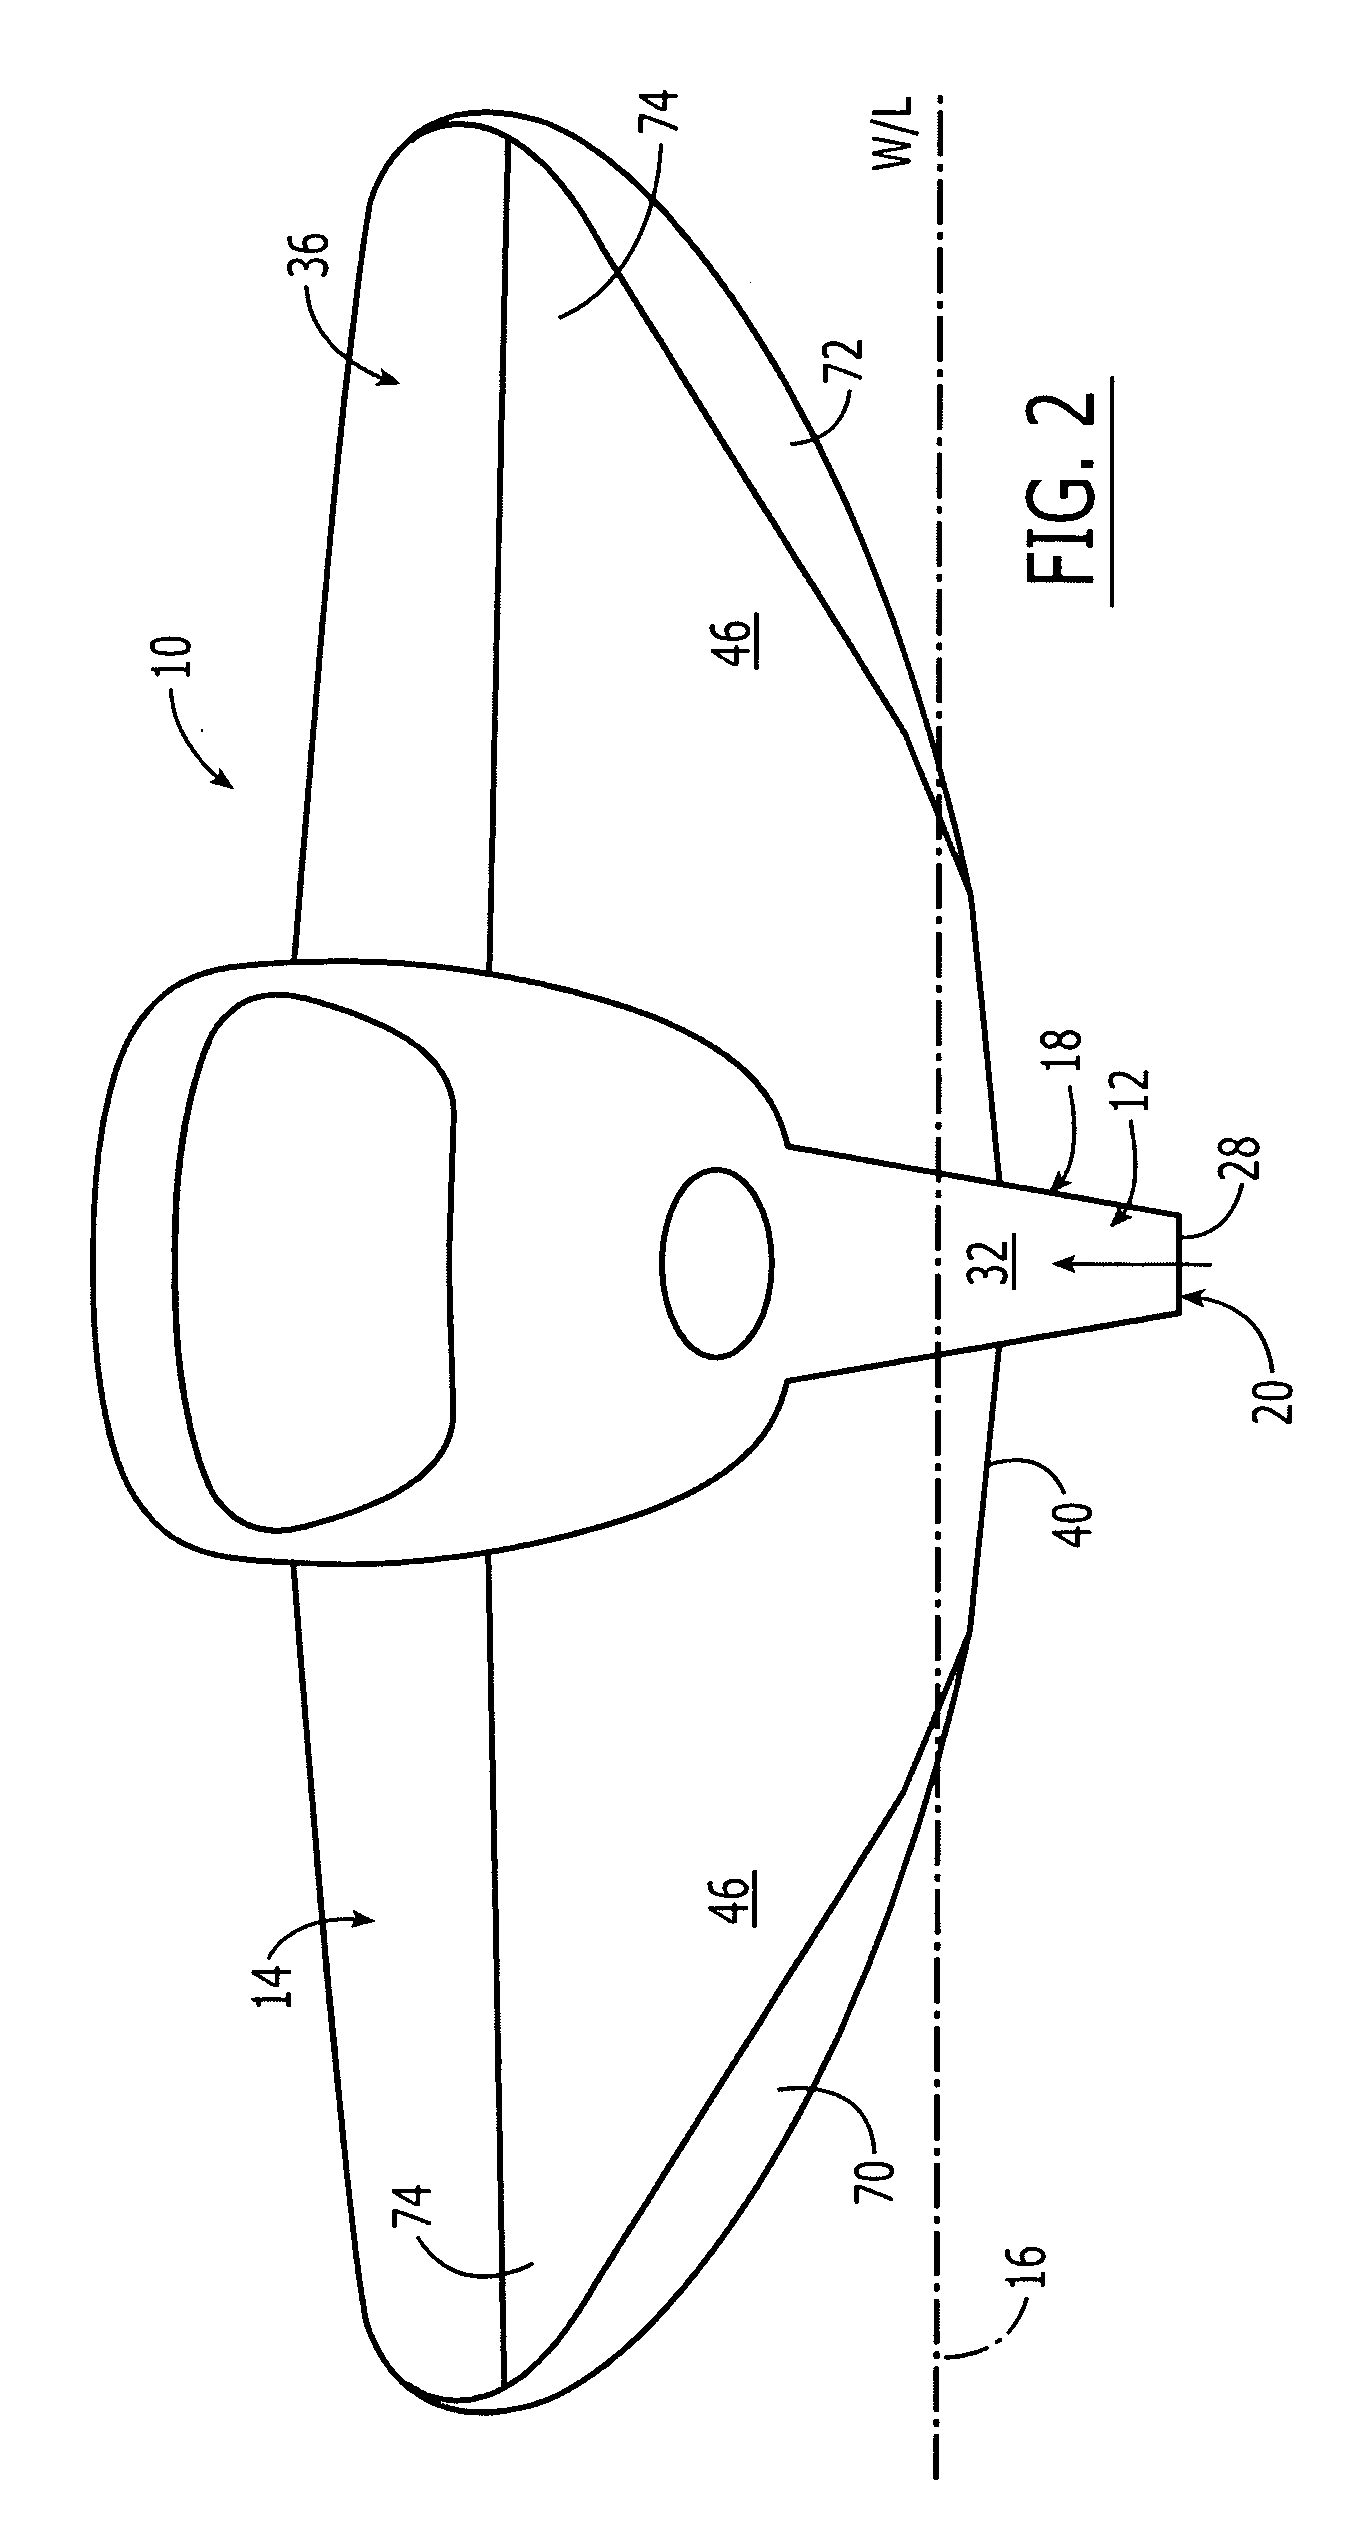 Transportation vehicle and method operable with improved drag and lift